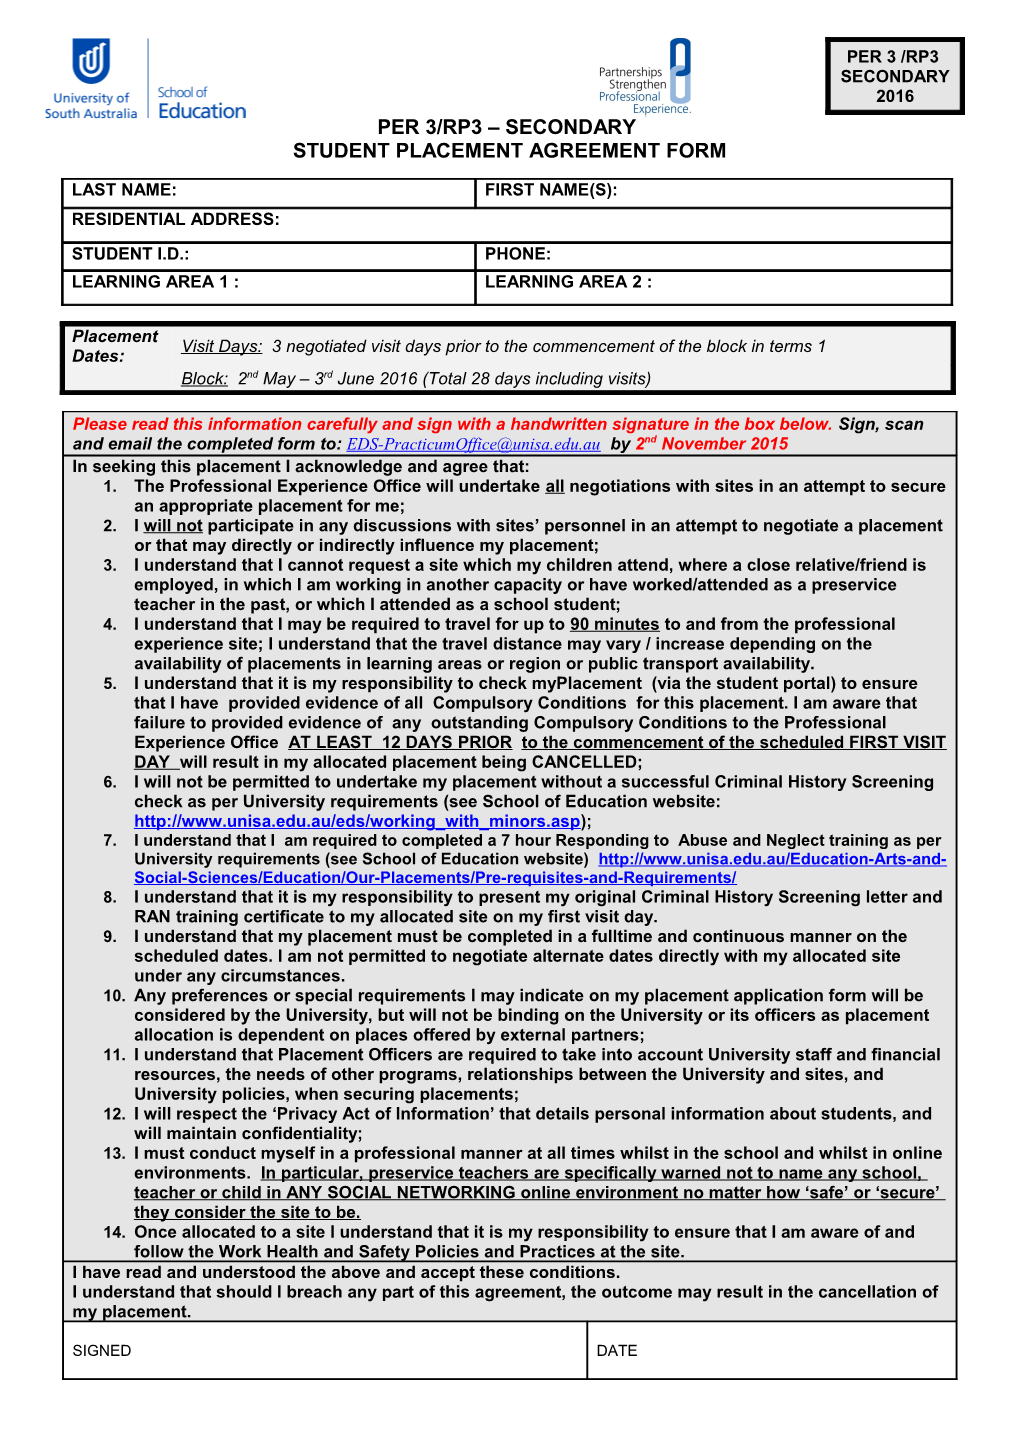 Student Placement Agreement Form